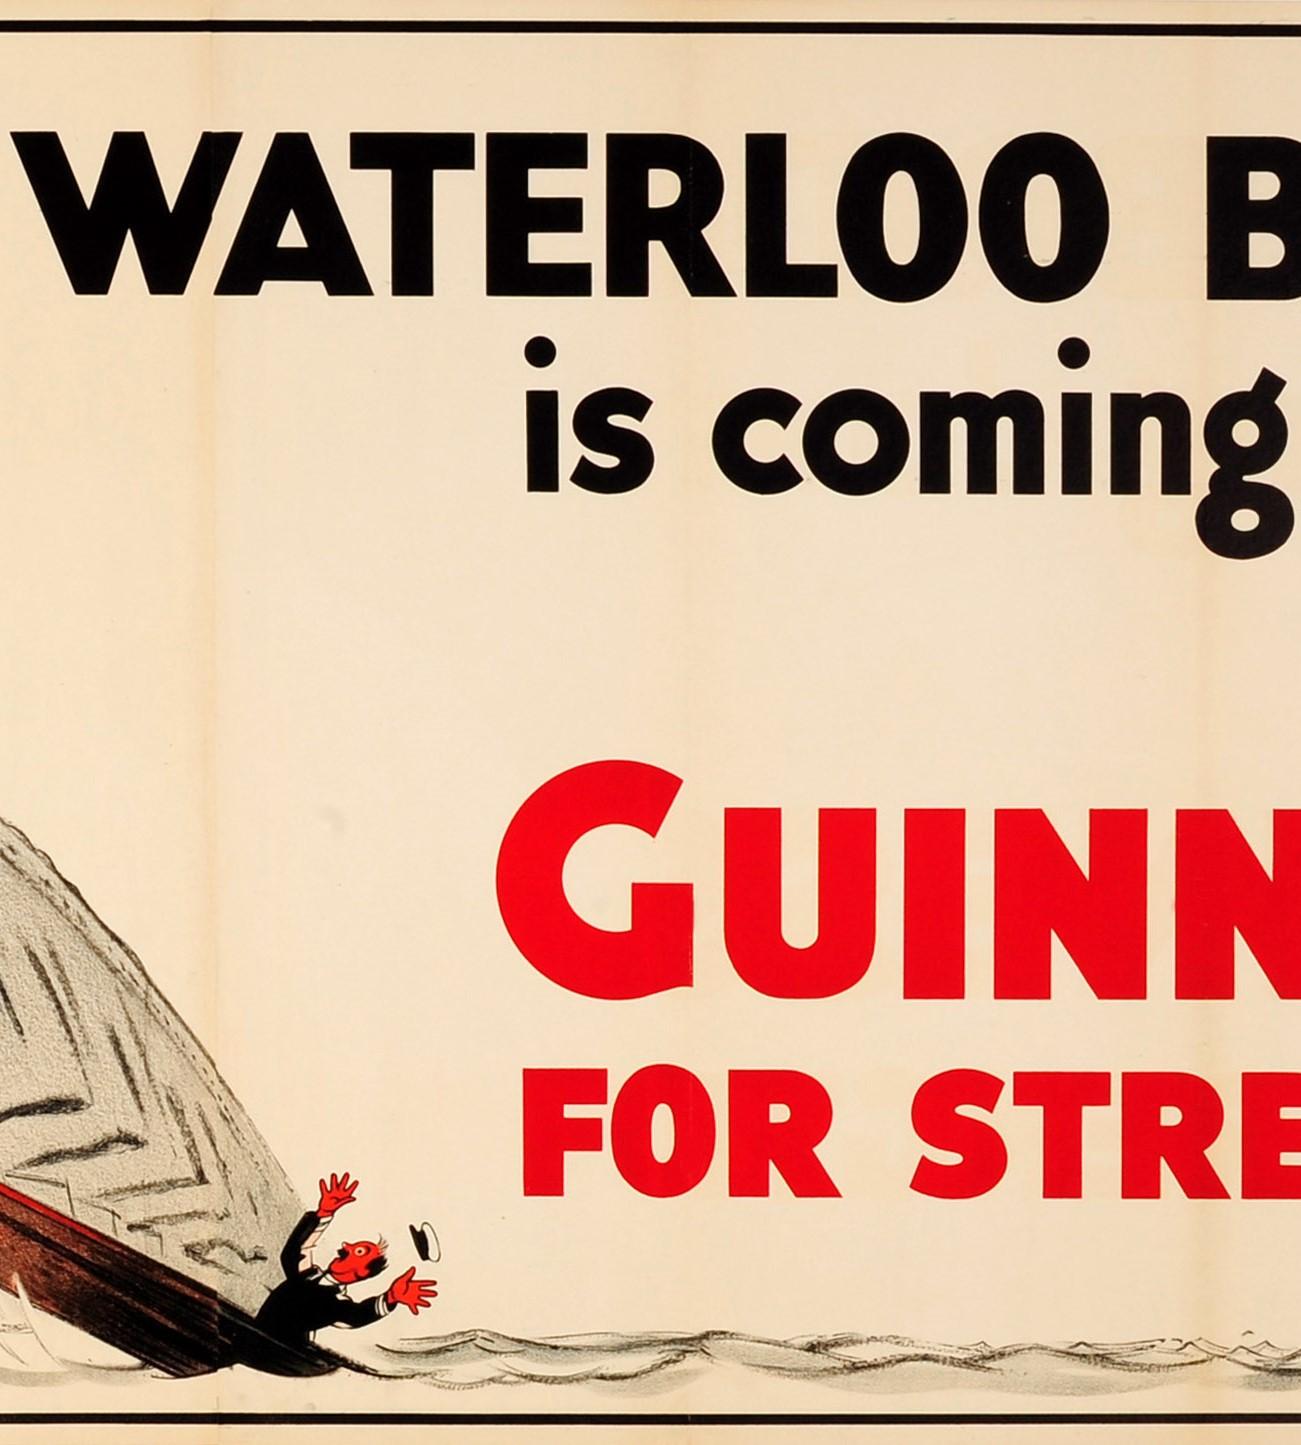 Original vintage Guinness advertising poster – Waterloo Bridge is Coming Down Guinness for Strength – featuring a fantastic and rare illustration by the notable artist John Gilroy (John Thomas Young Gilroy; 1898-1985) of a man drinking a pint of